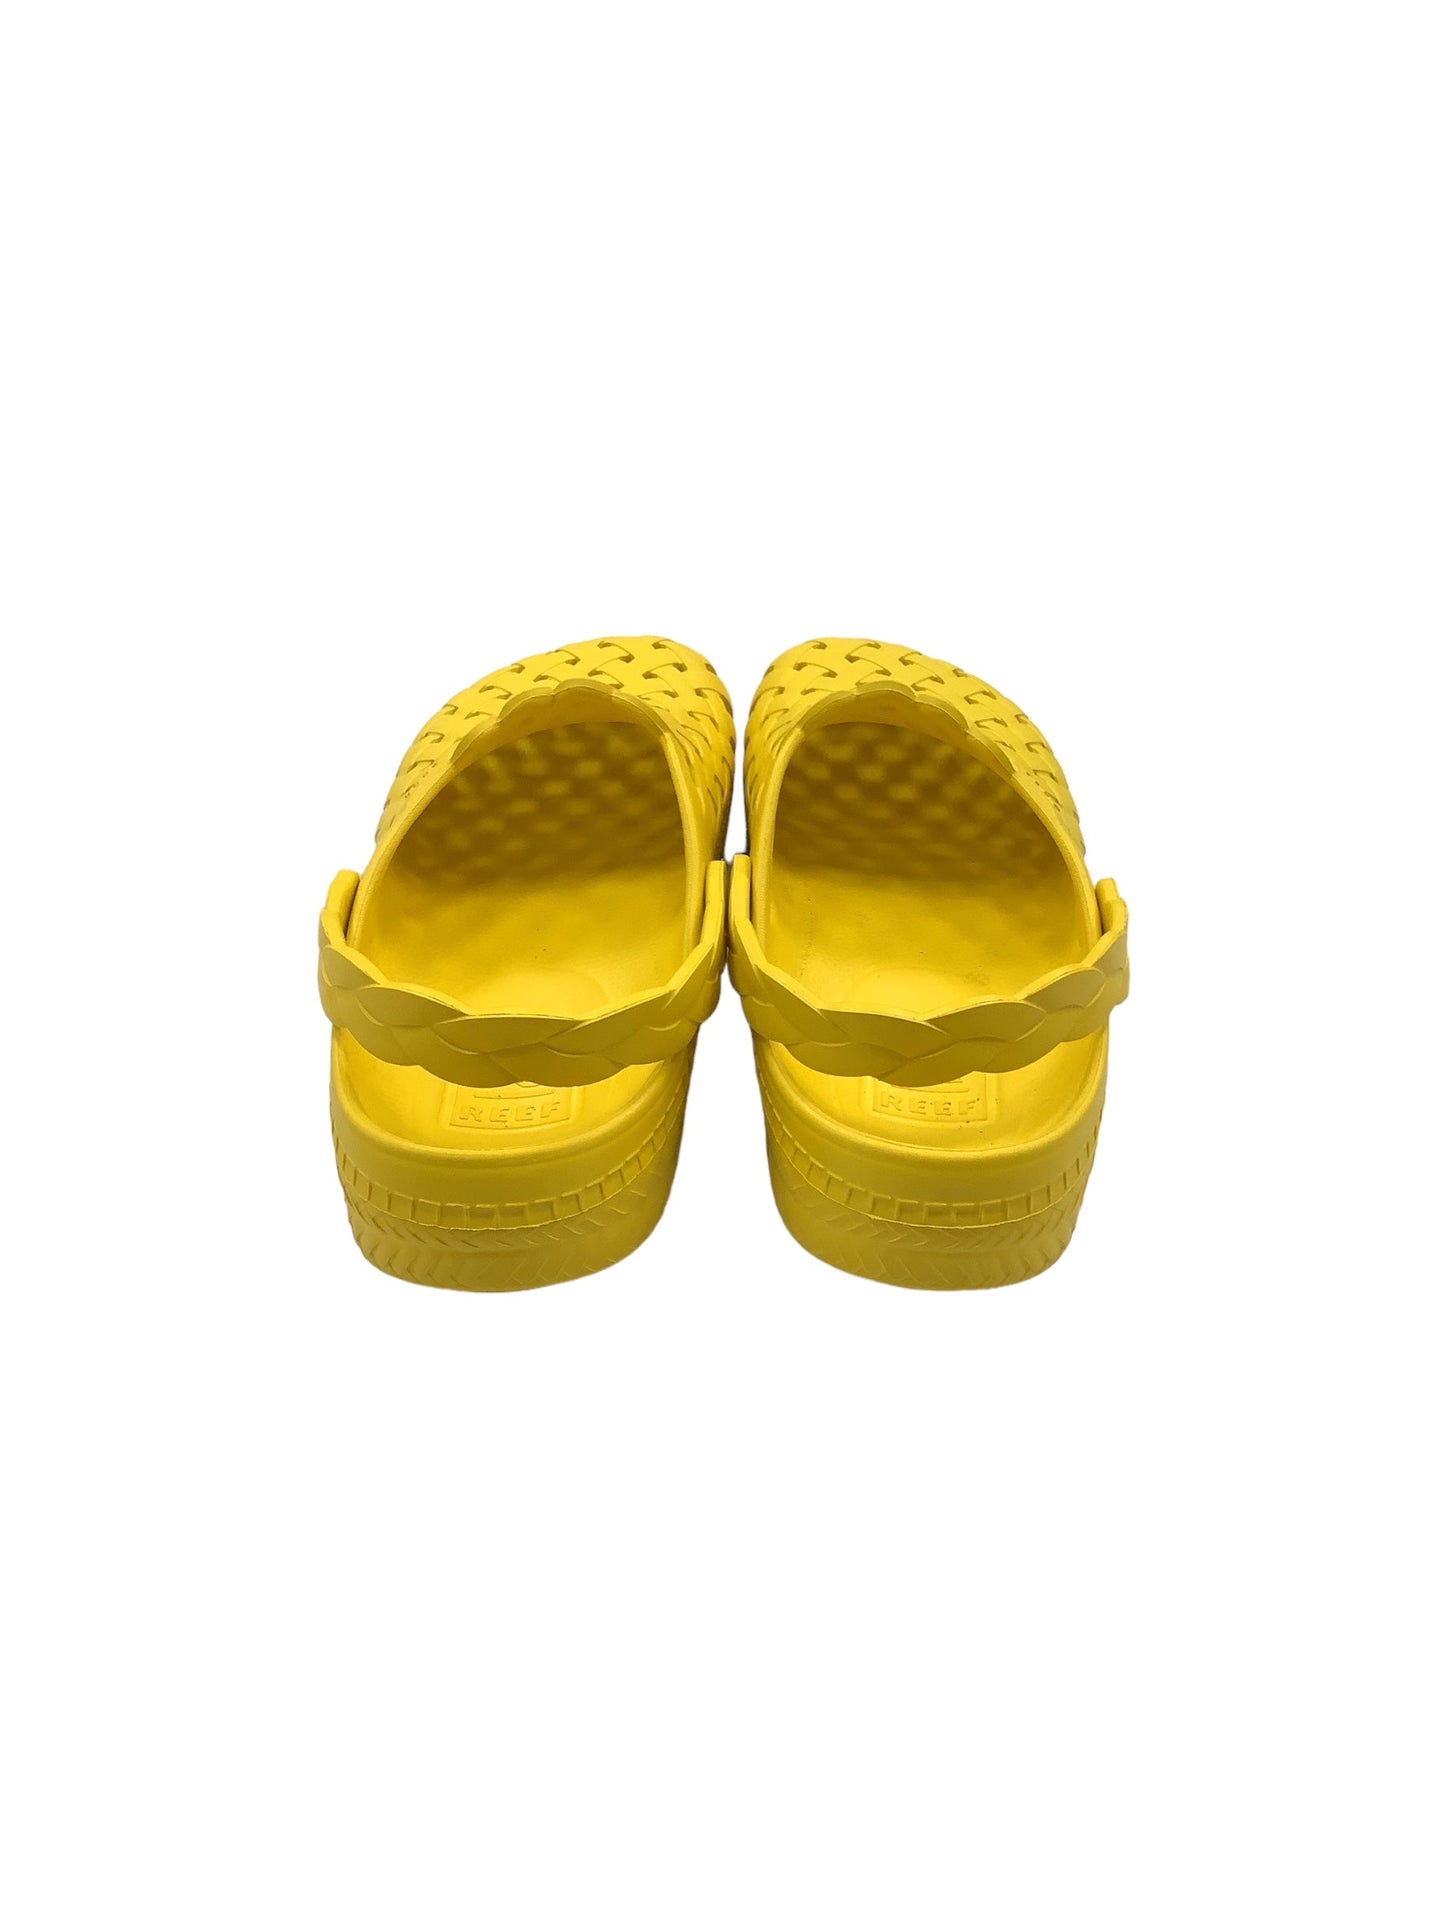 Yellow Shoes Flats Reef, Size 8